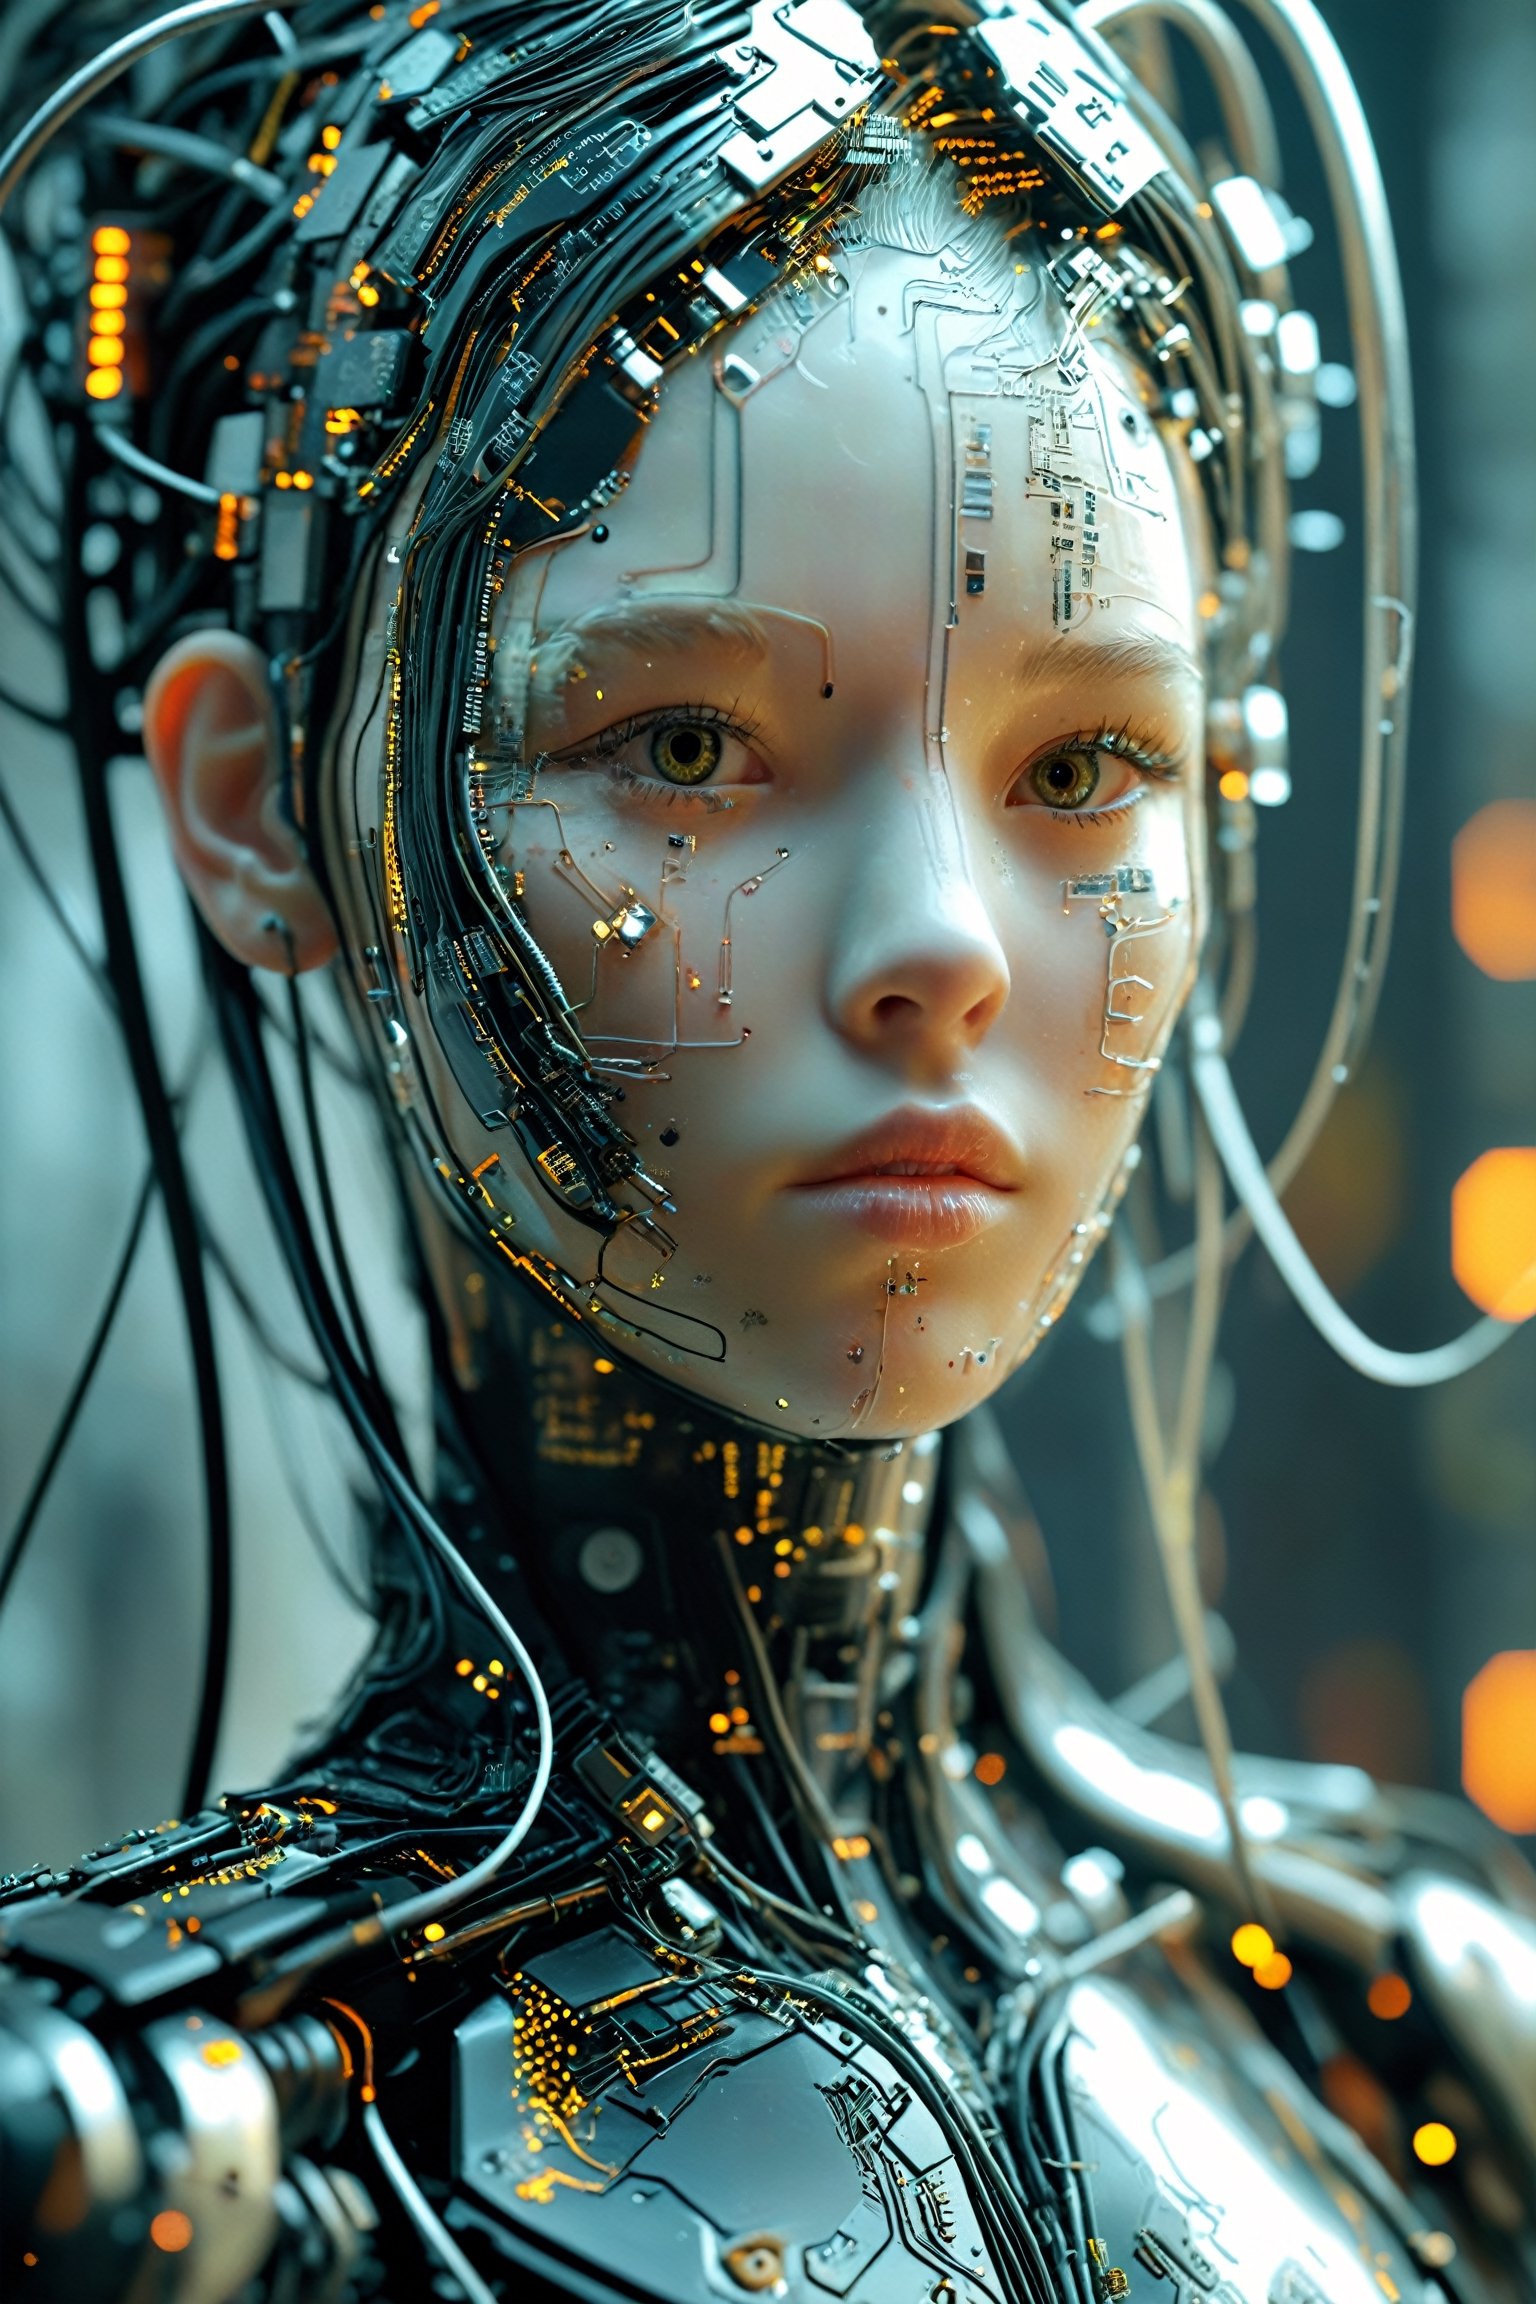 Impressive cyberpunk style art, albino female neuromancer, long hair composed of cables, many wires coming out of her head, high-tech jacket composed of circuit boards, metal parts, prosthetic hands made of high-tech materials
A breathtaking masterpiece, Cyborg,circuitboard,ktrmkp